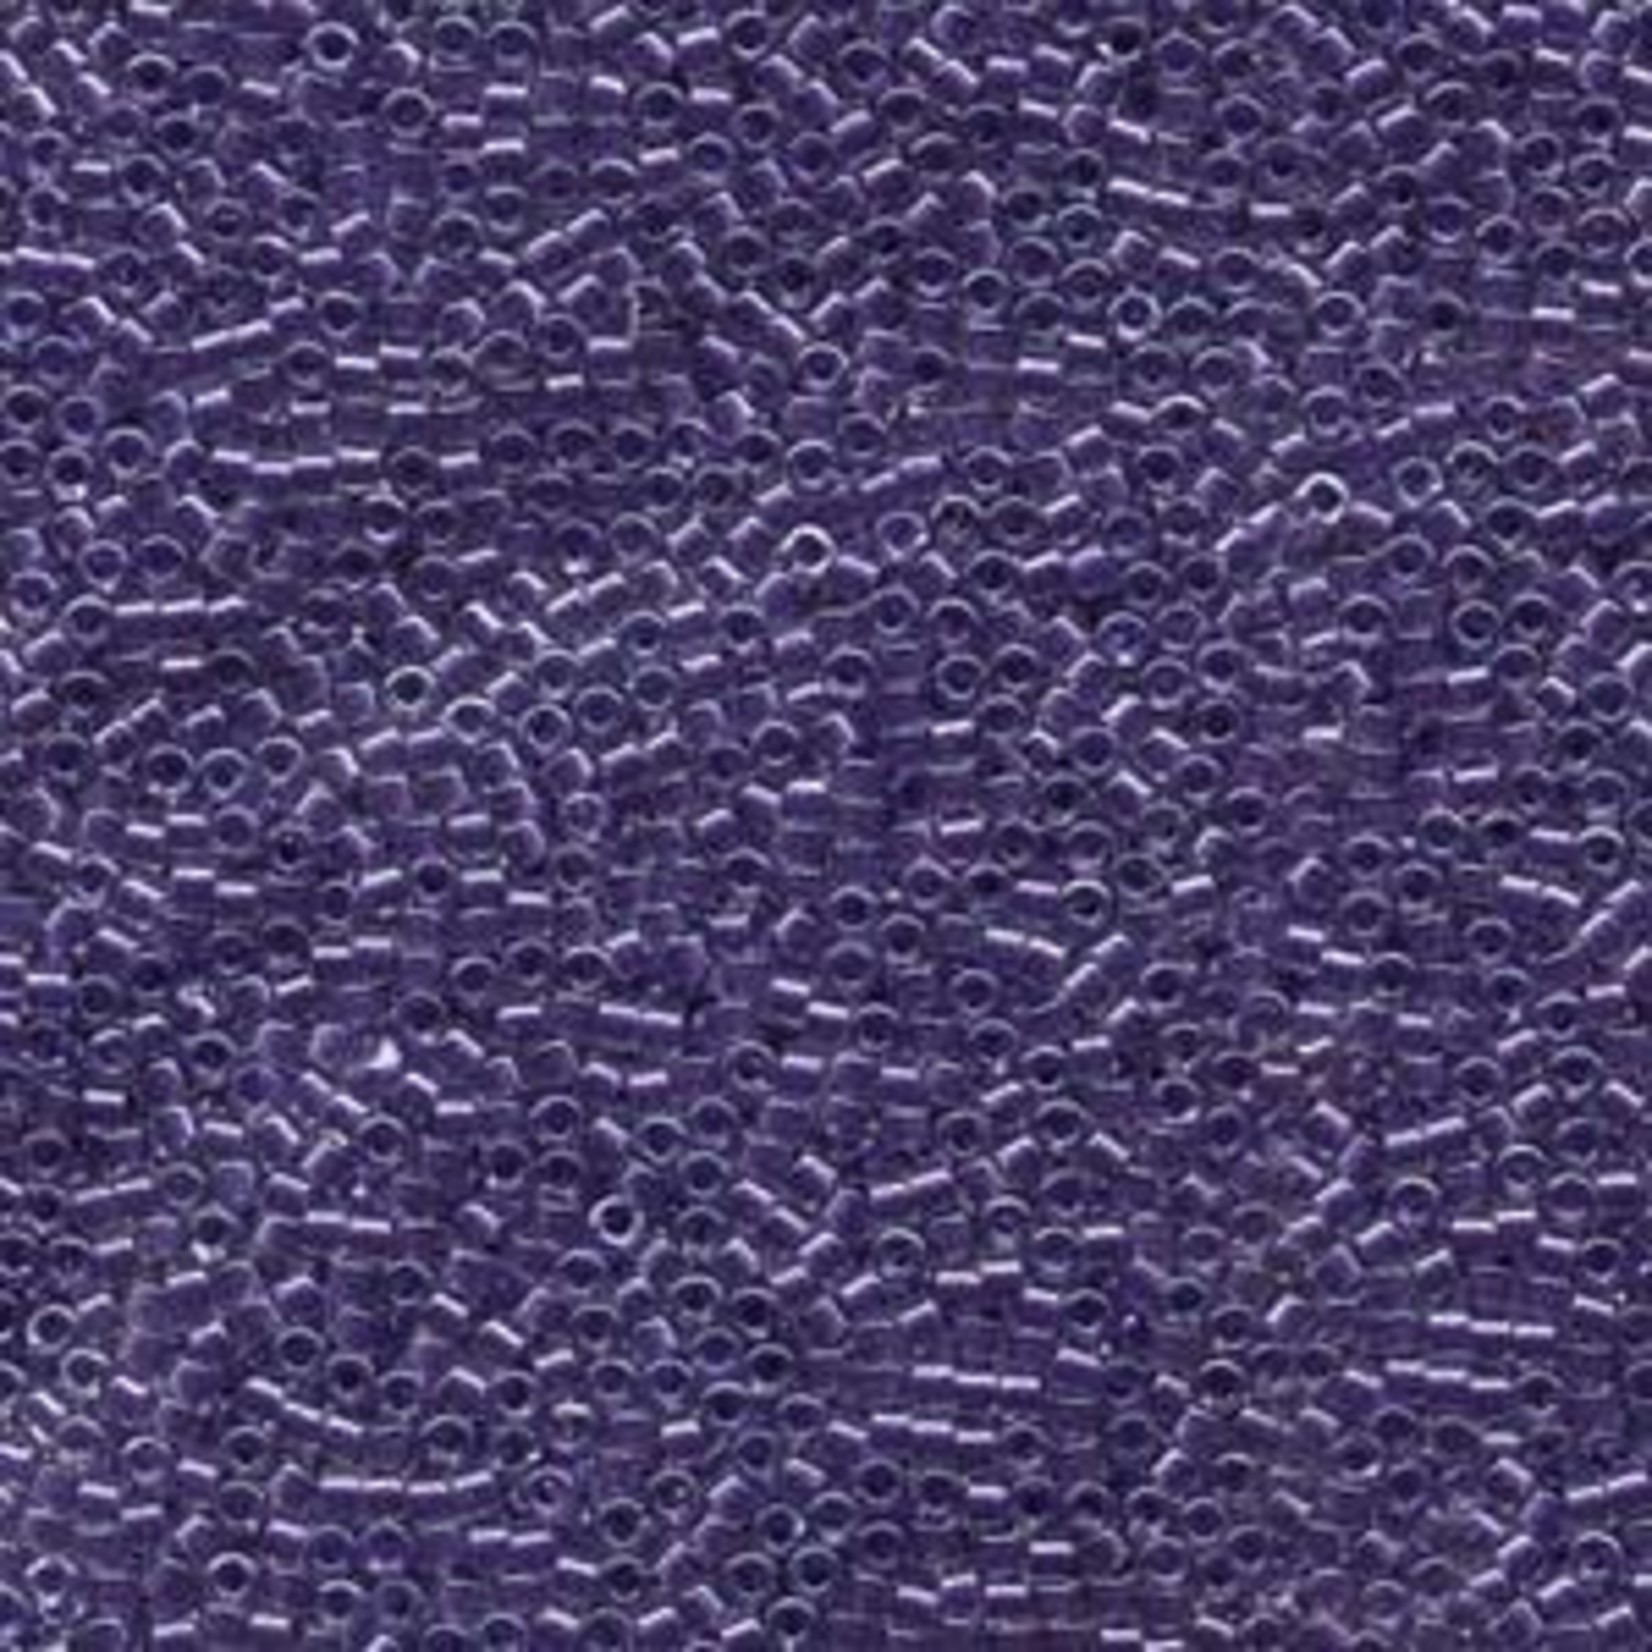 Miyuki Delica 11/0 Sparkling Violet-Lined Crystal Seed Beads